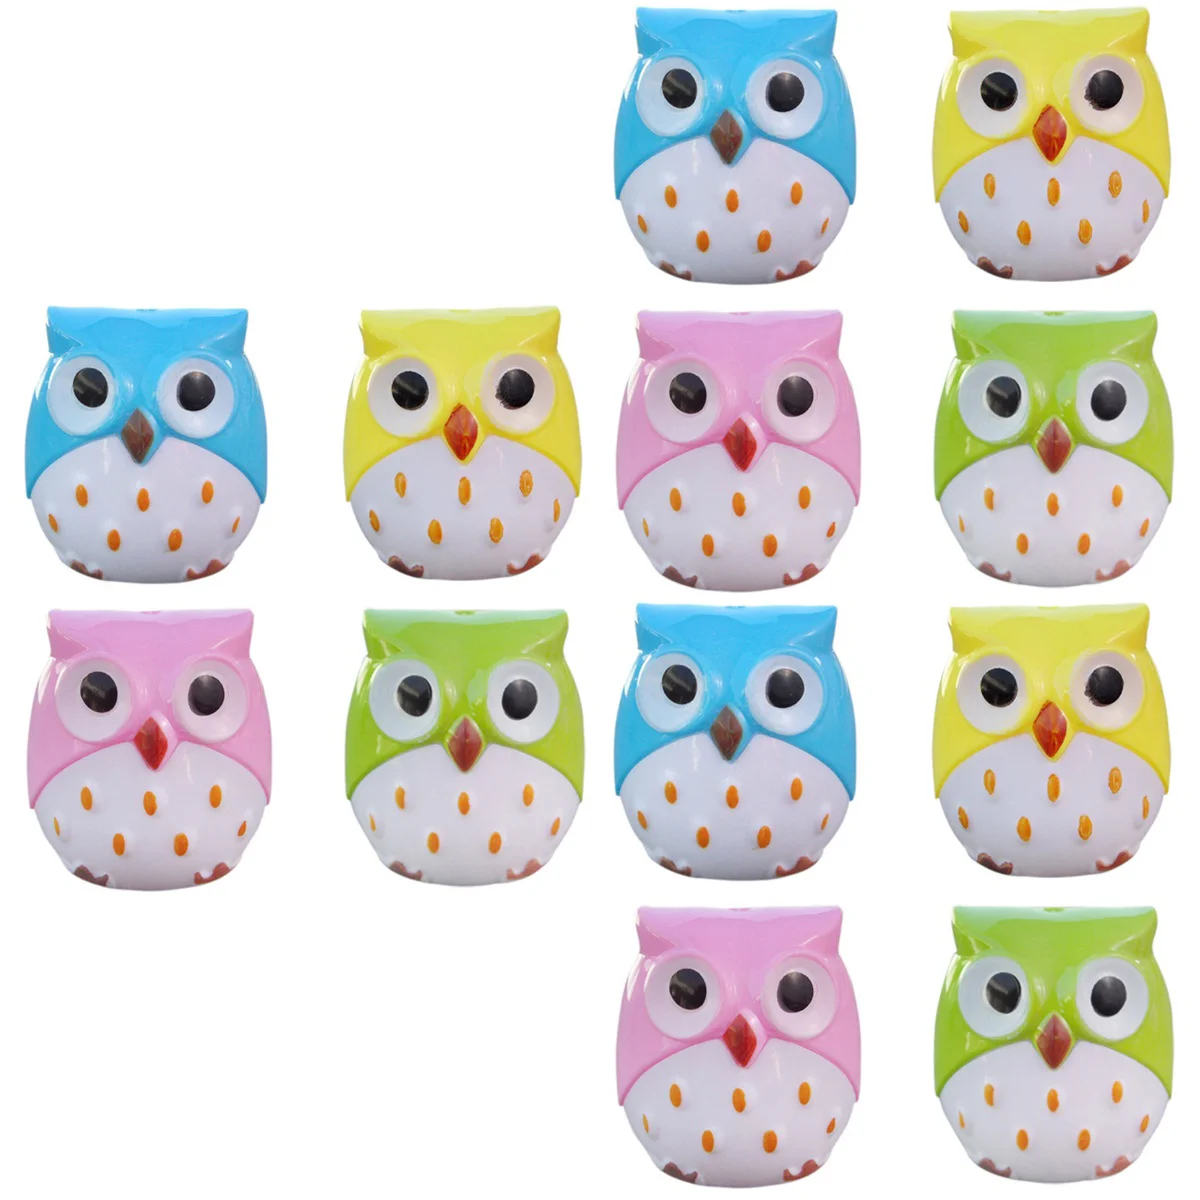 

12 pcs Sharpeners Owl Cartoon Novelty Two Holes Sharpeners Classroom School Gift Prize for Kids